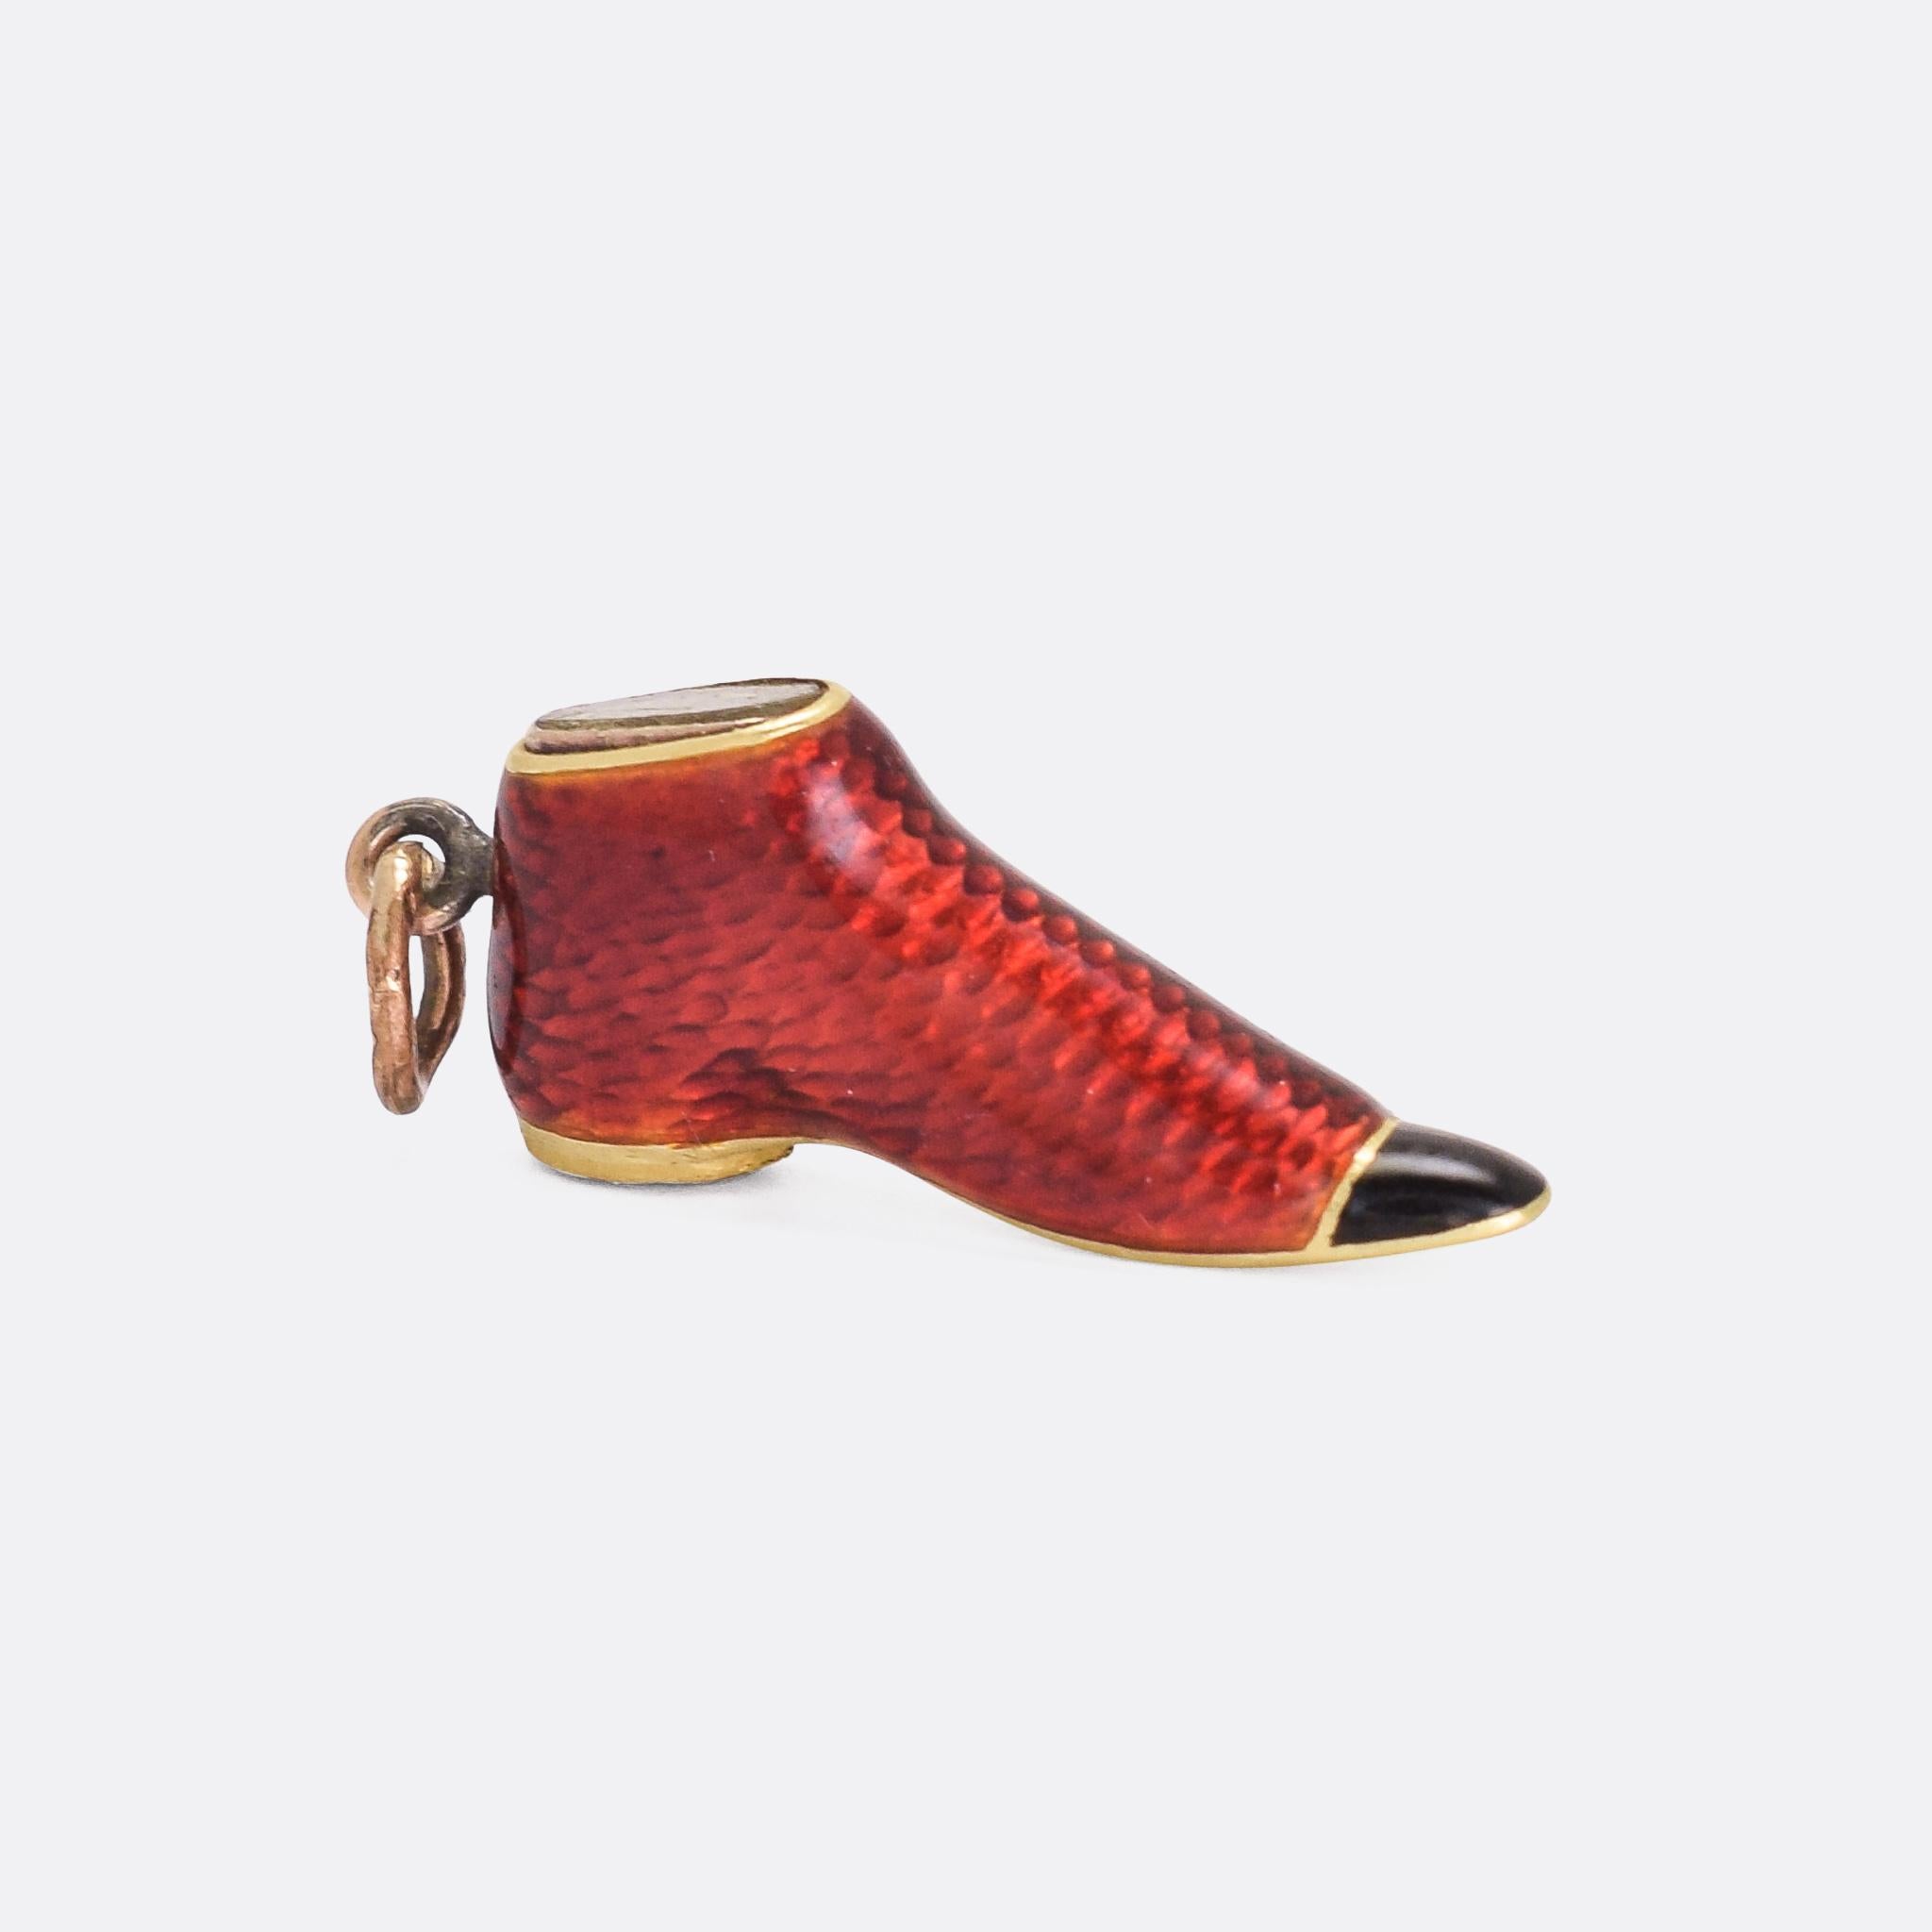 A cool and unusual antique charm, modelled as an old fashioned red and black shoe. It's finished in fine guilloché enamelling, and features an oval locket compartment in the top and a chalcedony seal in the heal. Pretty neat, right? I bet you've